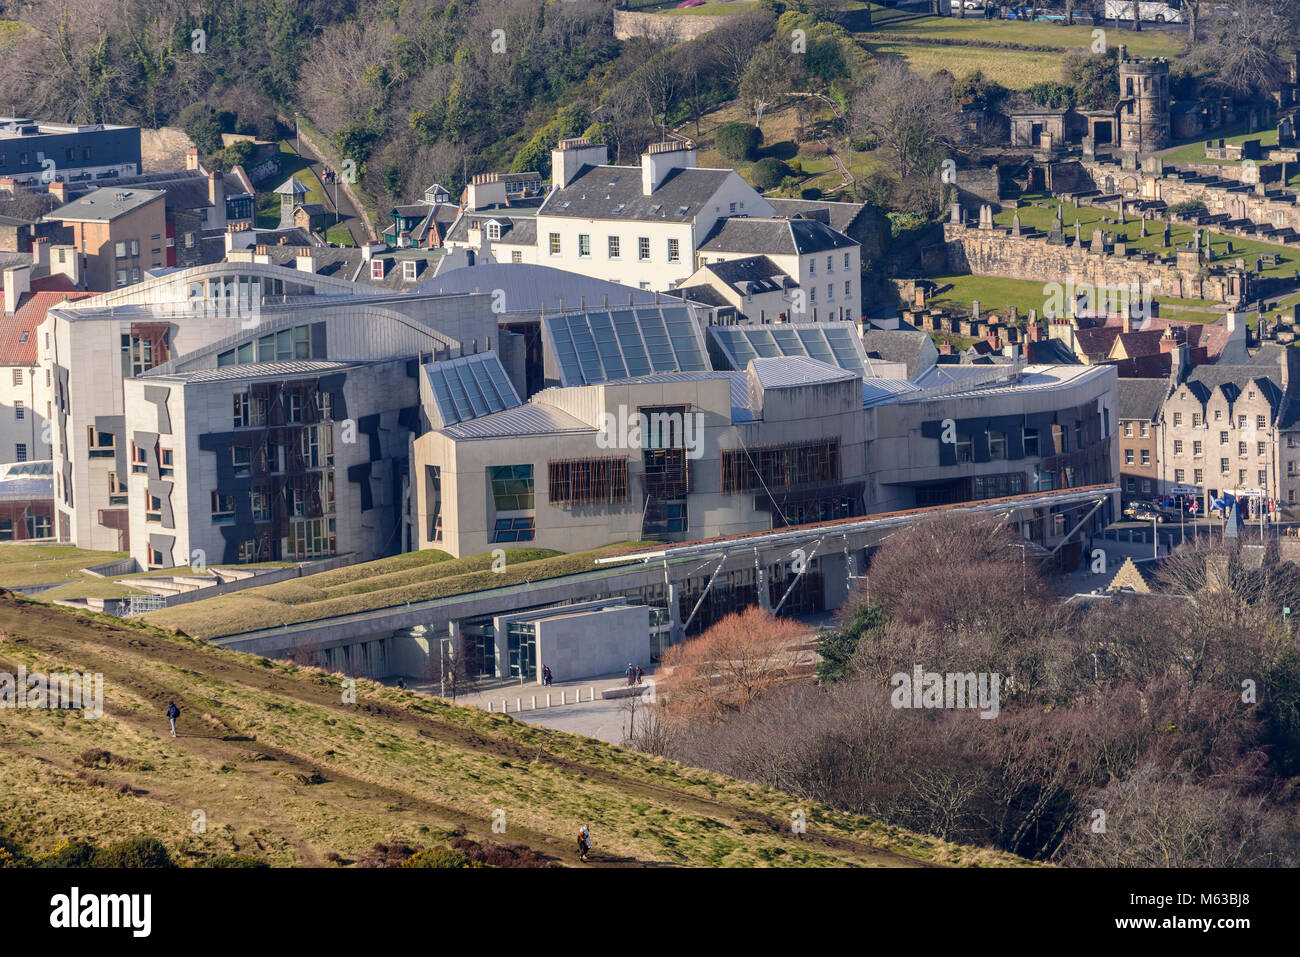 The Scottish Parliament building Holyrood. Scotland. aerial Stock Photo